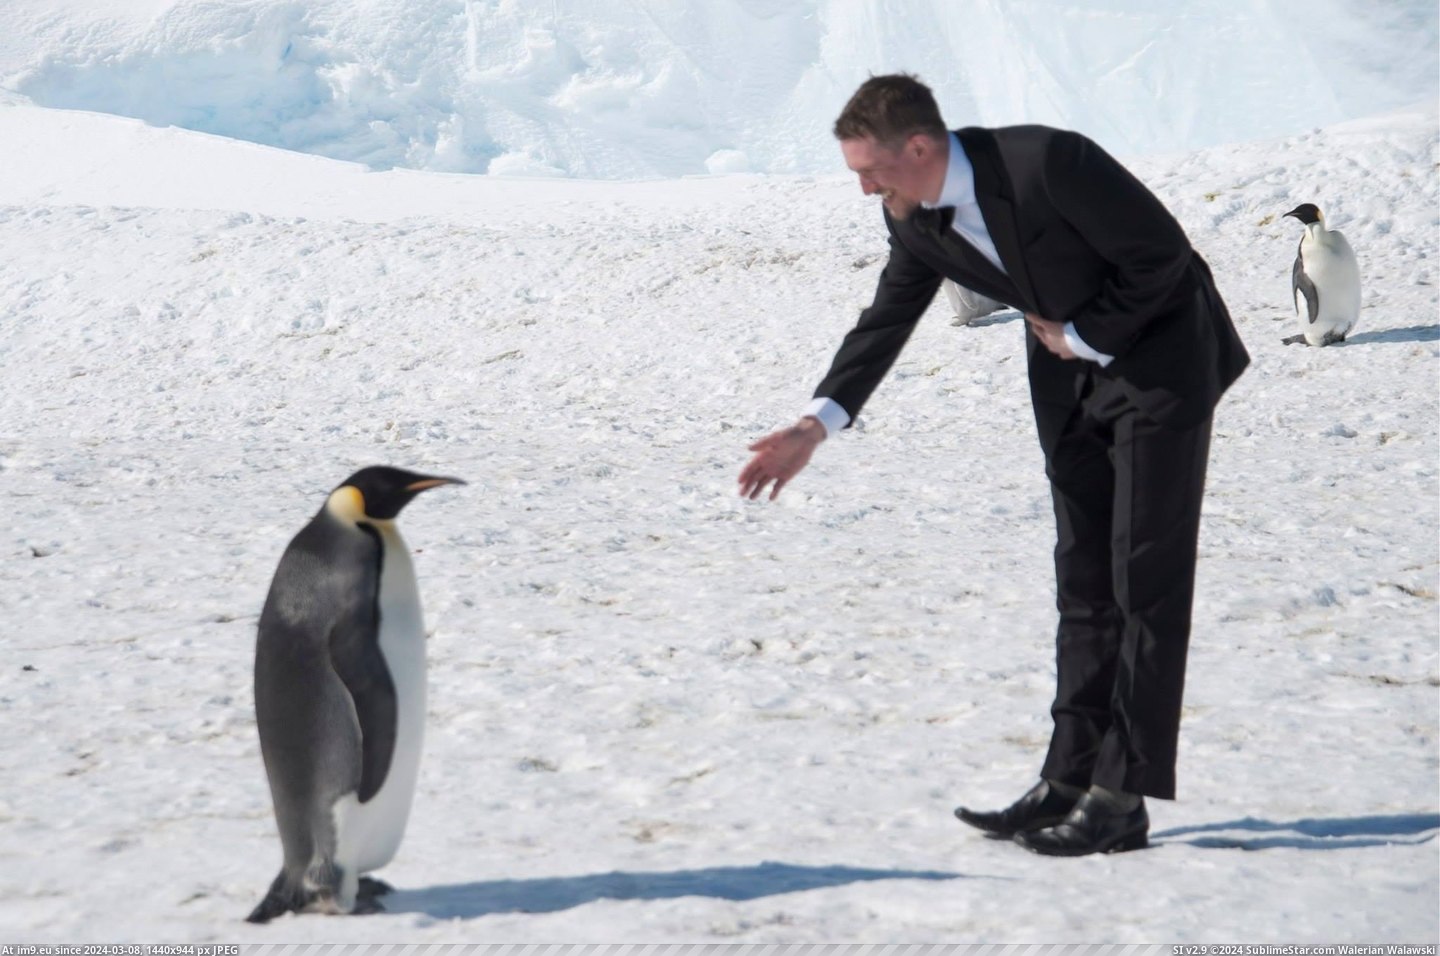 #Friend #Working #Antarctica #Locals #Moment #Introducing [Pics] A friend of mine is working in Antarctica at the moment, here he is introducing himself to the locals. Pic. (Image of album My r/PICS favs))